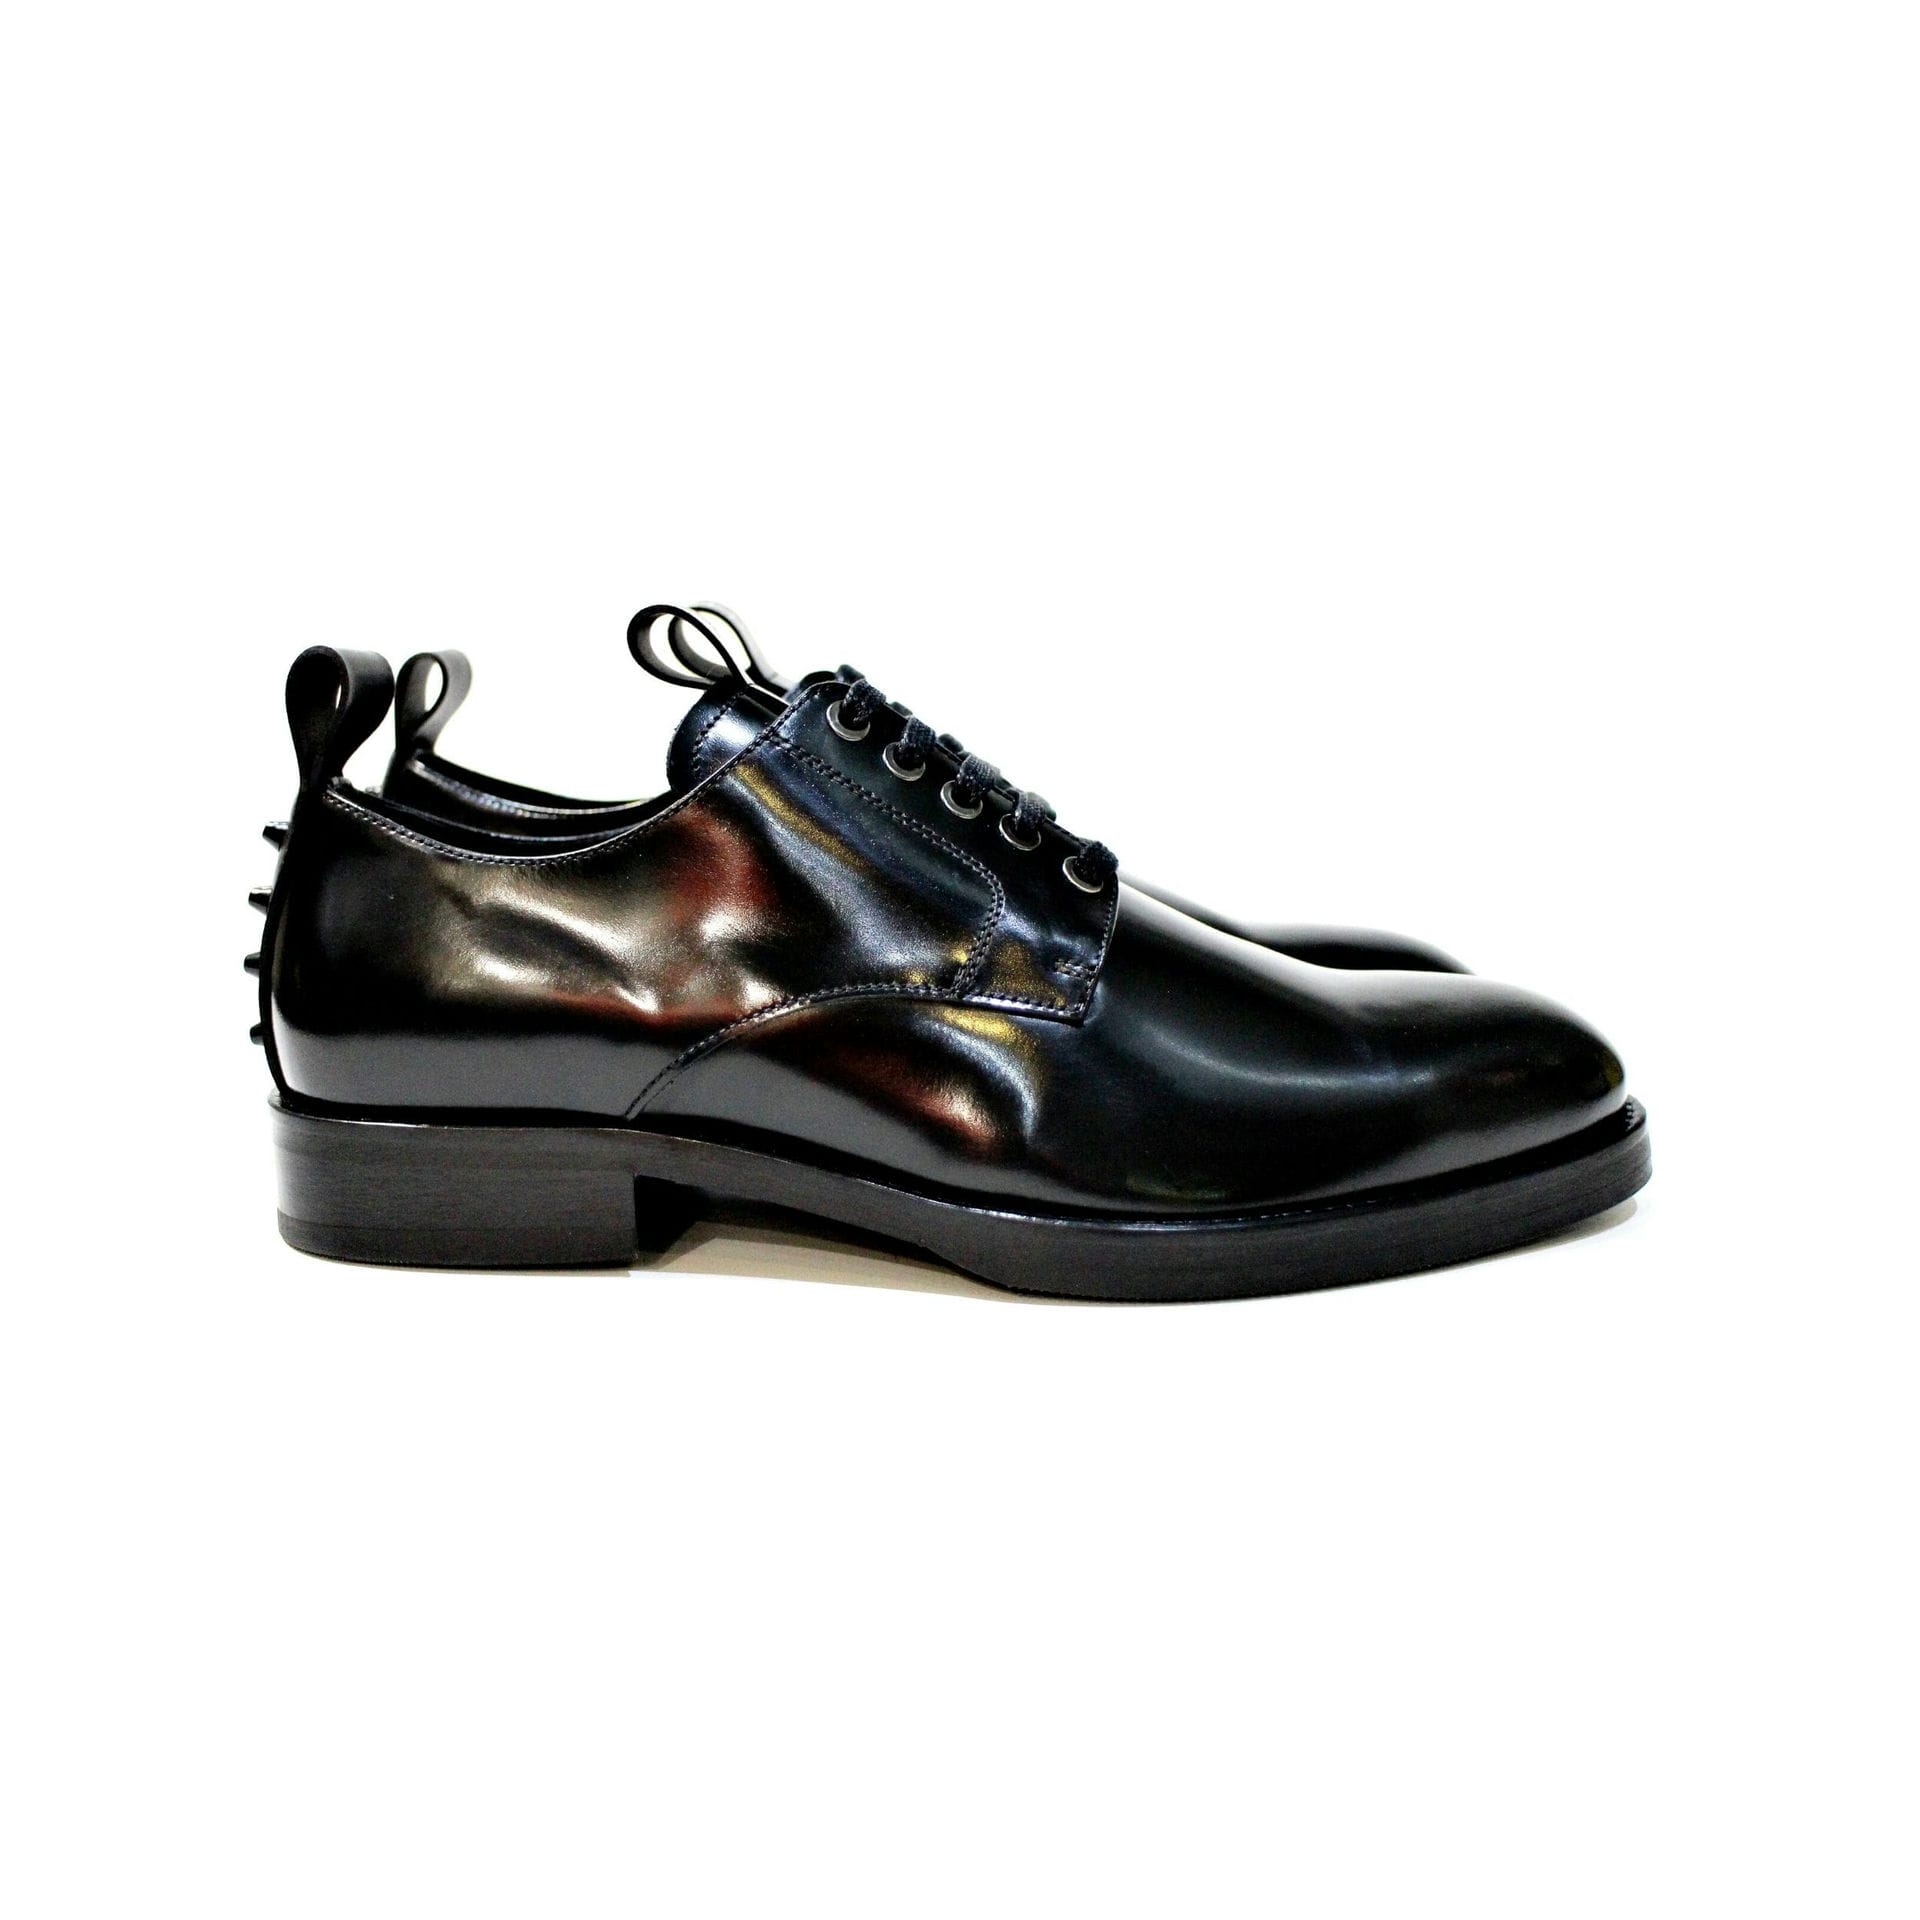 Shoe consisting of polished leather, with rubber sole. “Walk with Pintta”